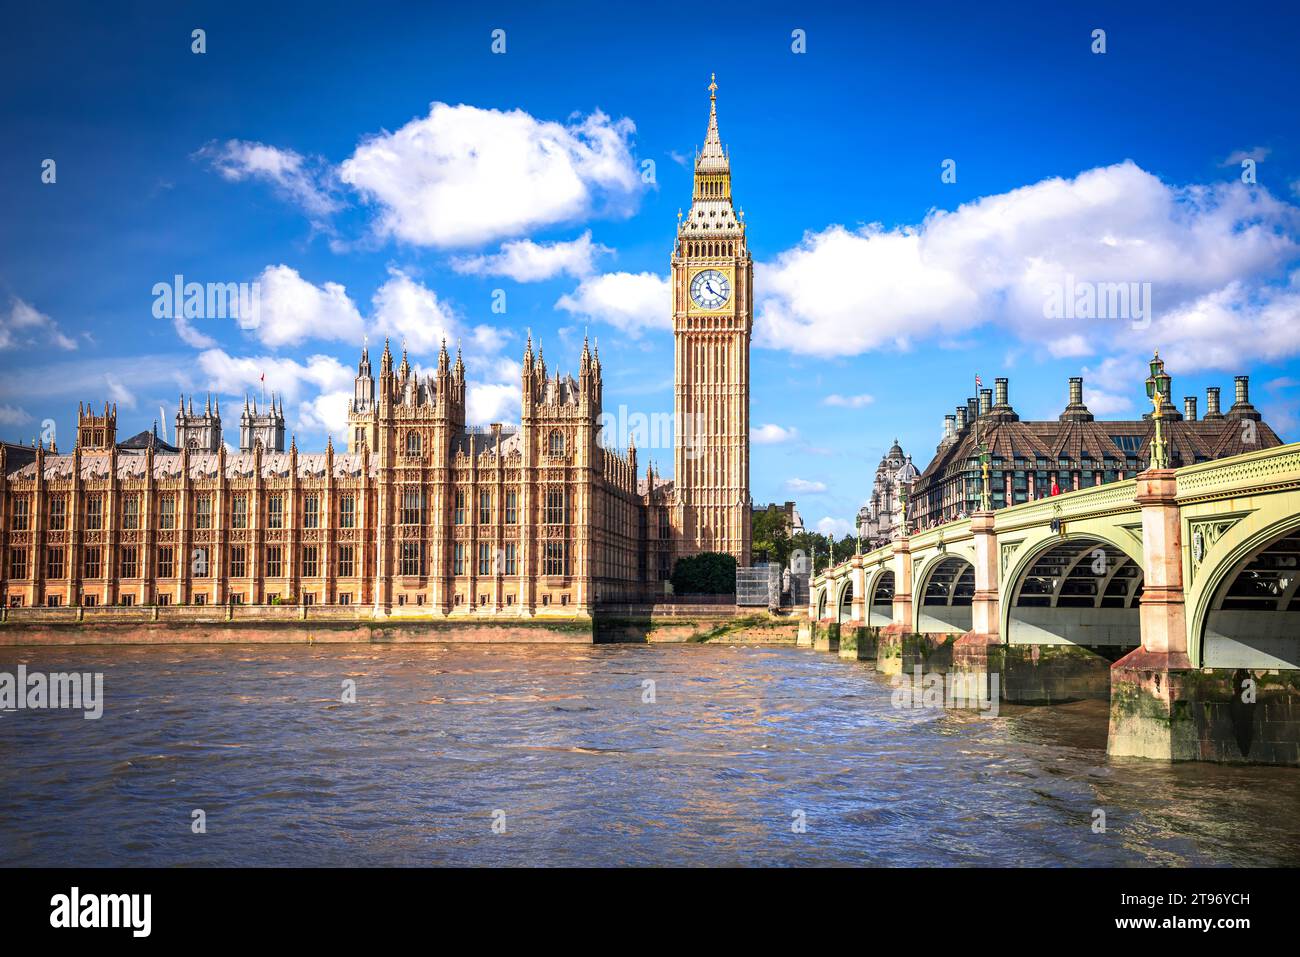 London, United Kingdom. Big Ben and Parliament Building, beautiful blue sky with white clouds. Stock Photo